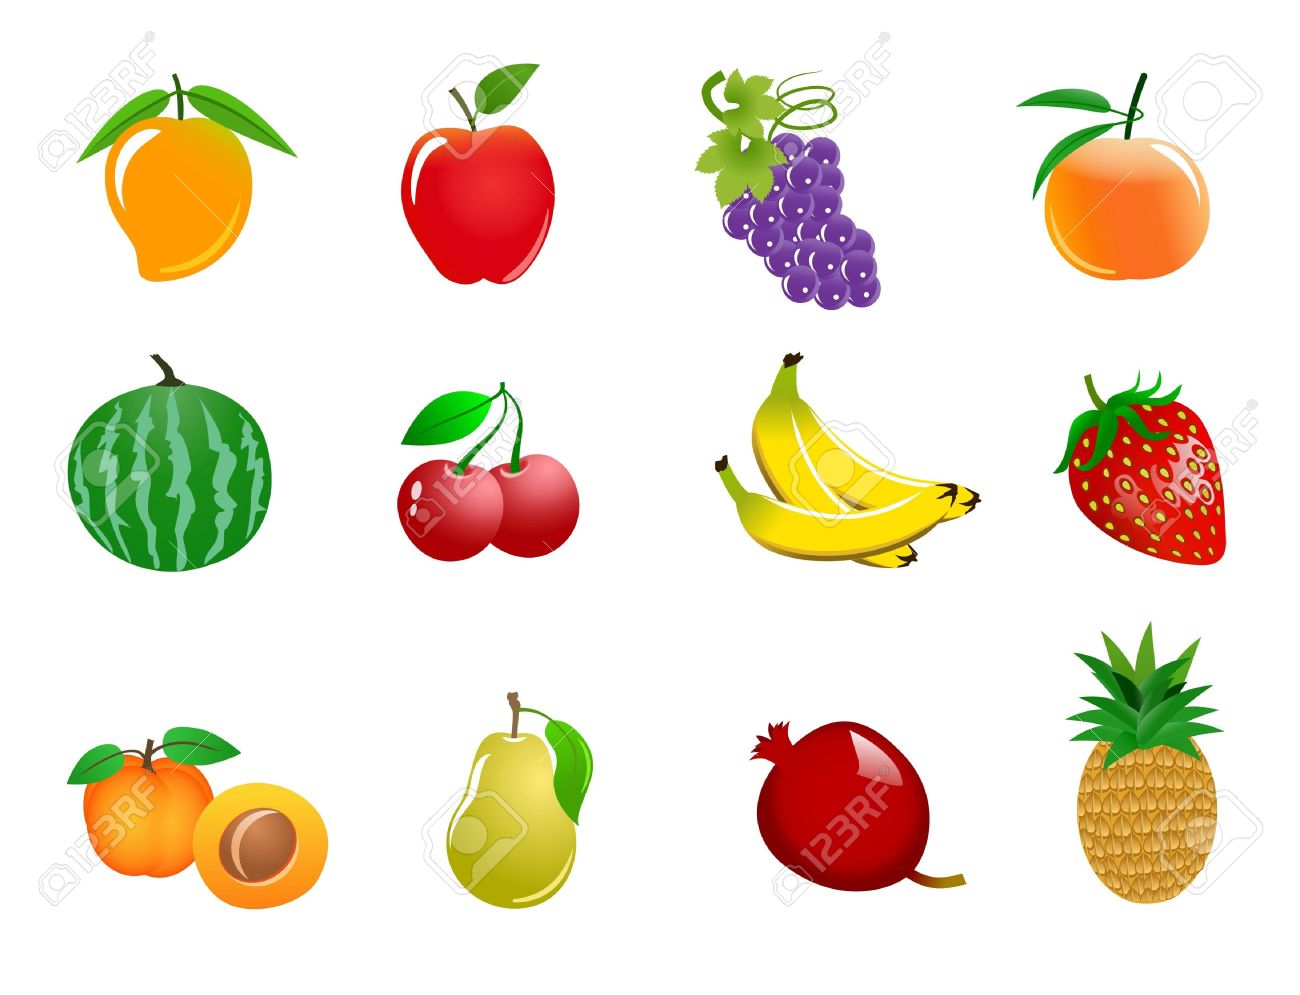 clipart of different fruits - photo #2